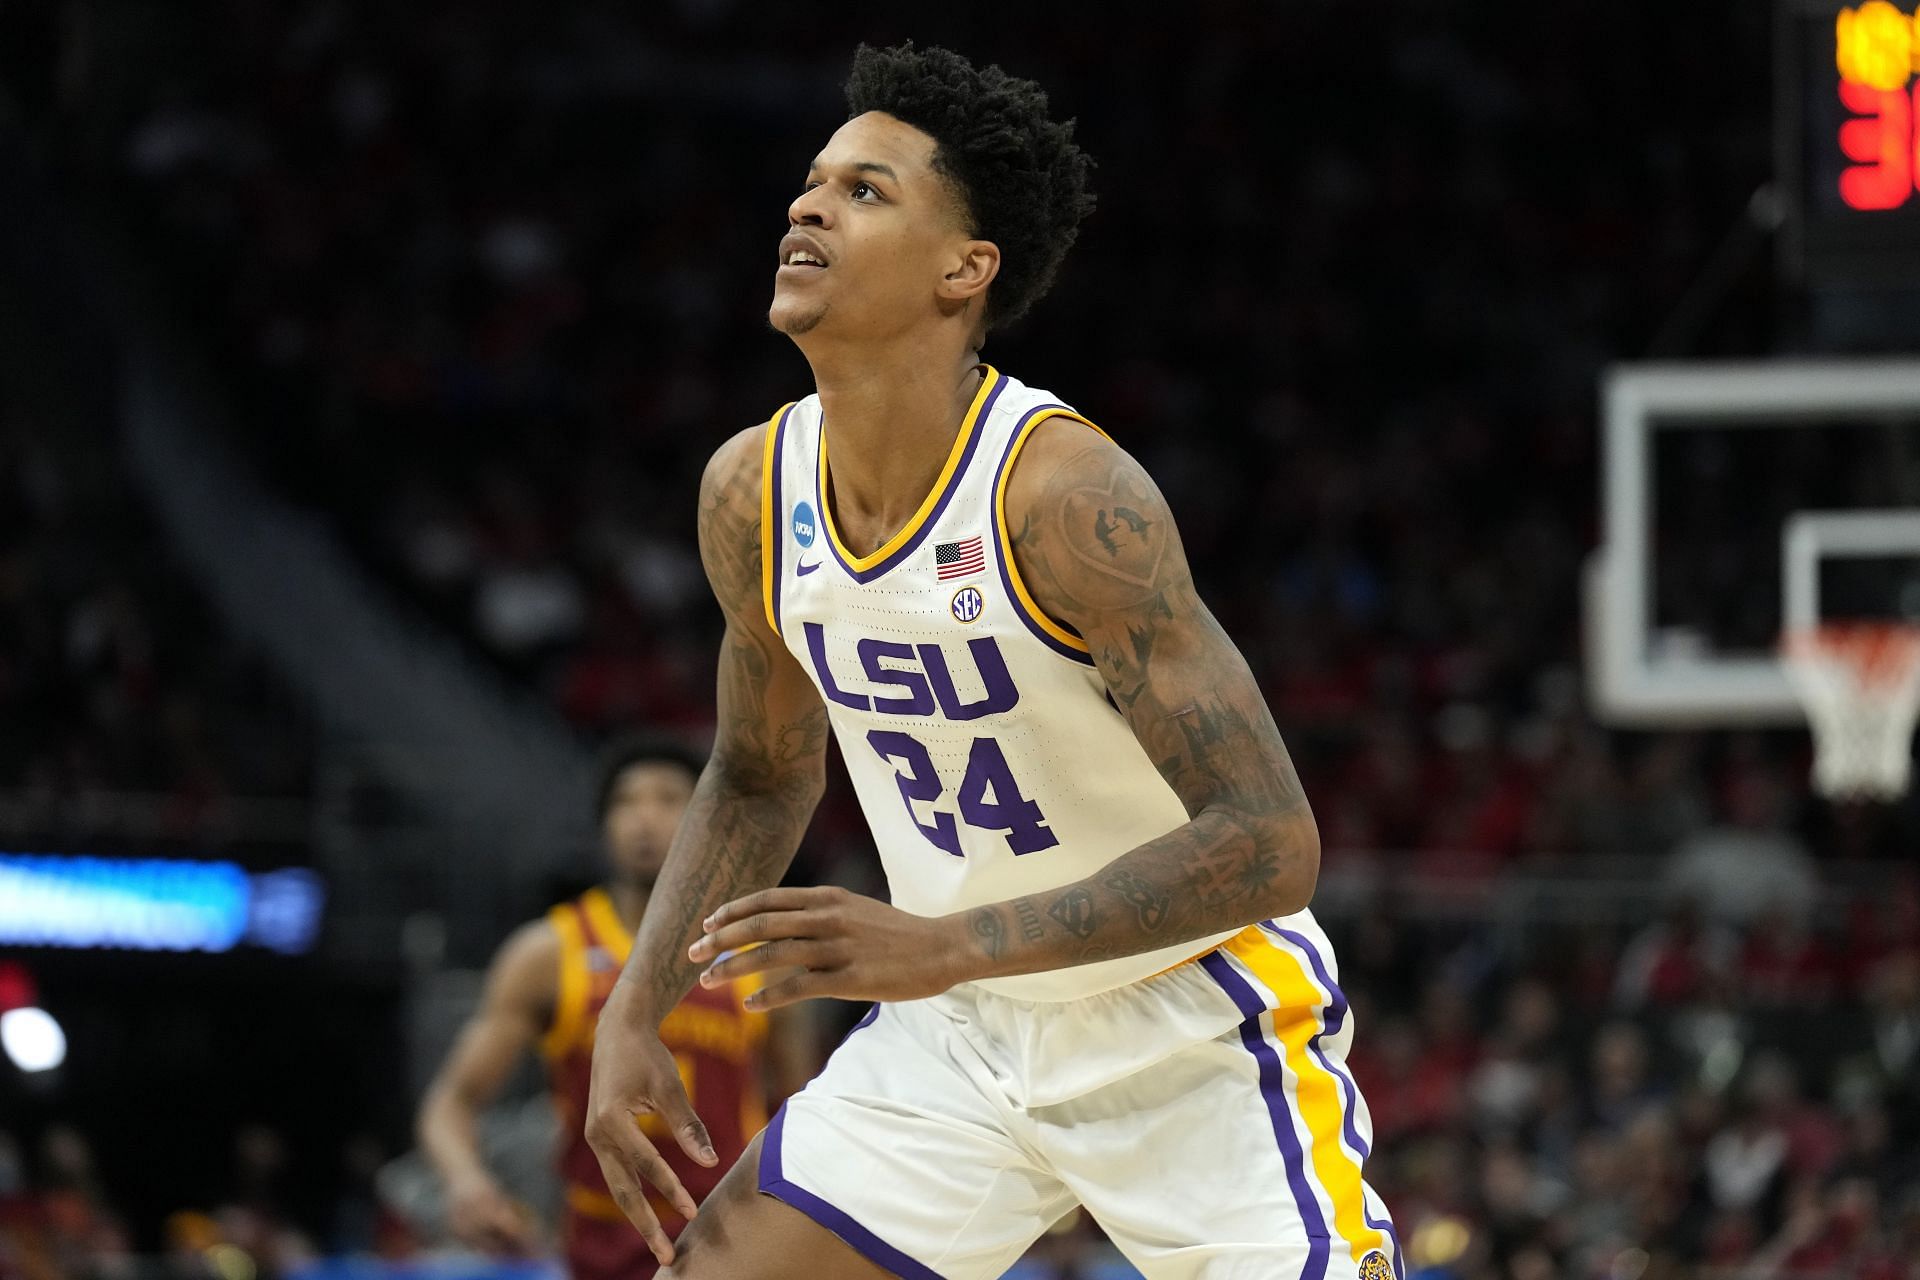 'He's no f**kin chance getting drafted', 'Bro gonna be selected just  because it's Shaq son', 'All due respect he averaged 3 PPG at LSU this  year' - Fans utterly deflated over news of Shaquille O'Neal's son Shareef  becoming eligible for 2022 NBA Draft